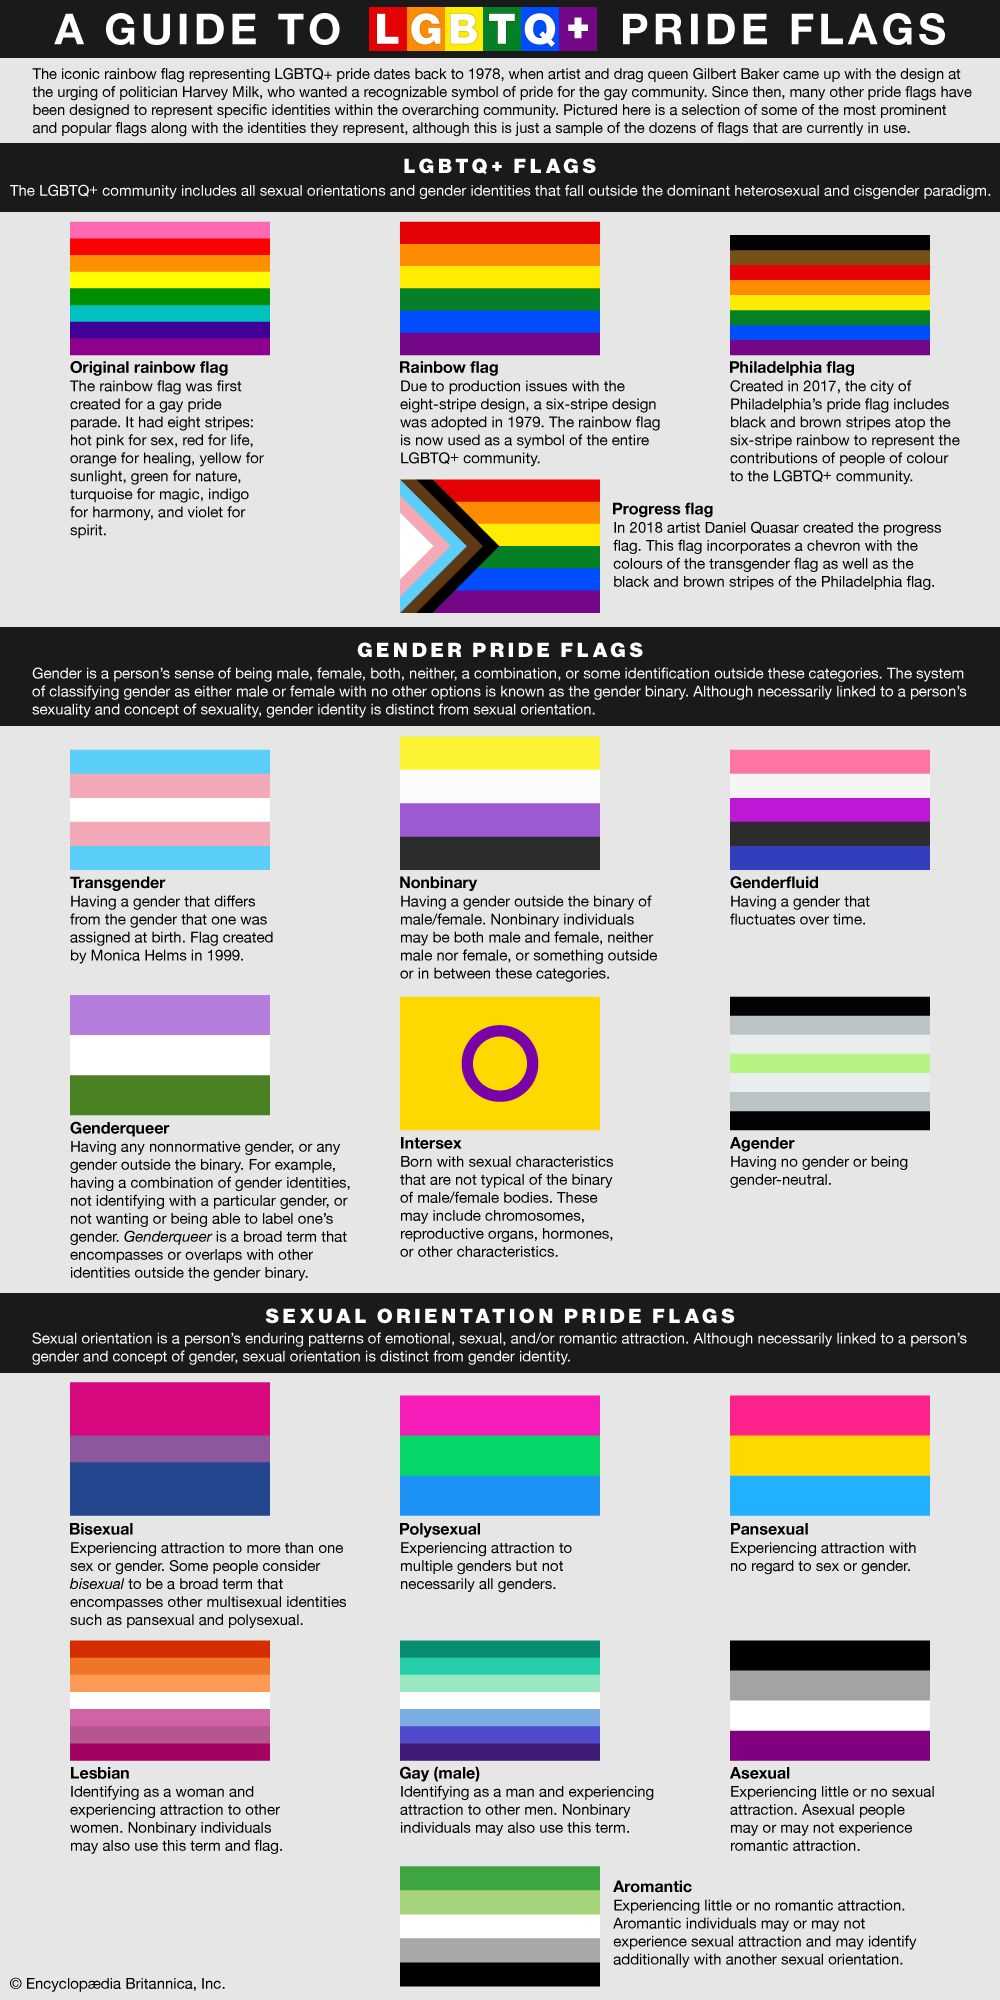 Distinguishing Queer and Lesbian Communities